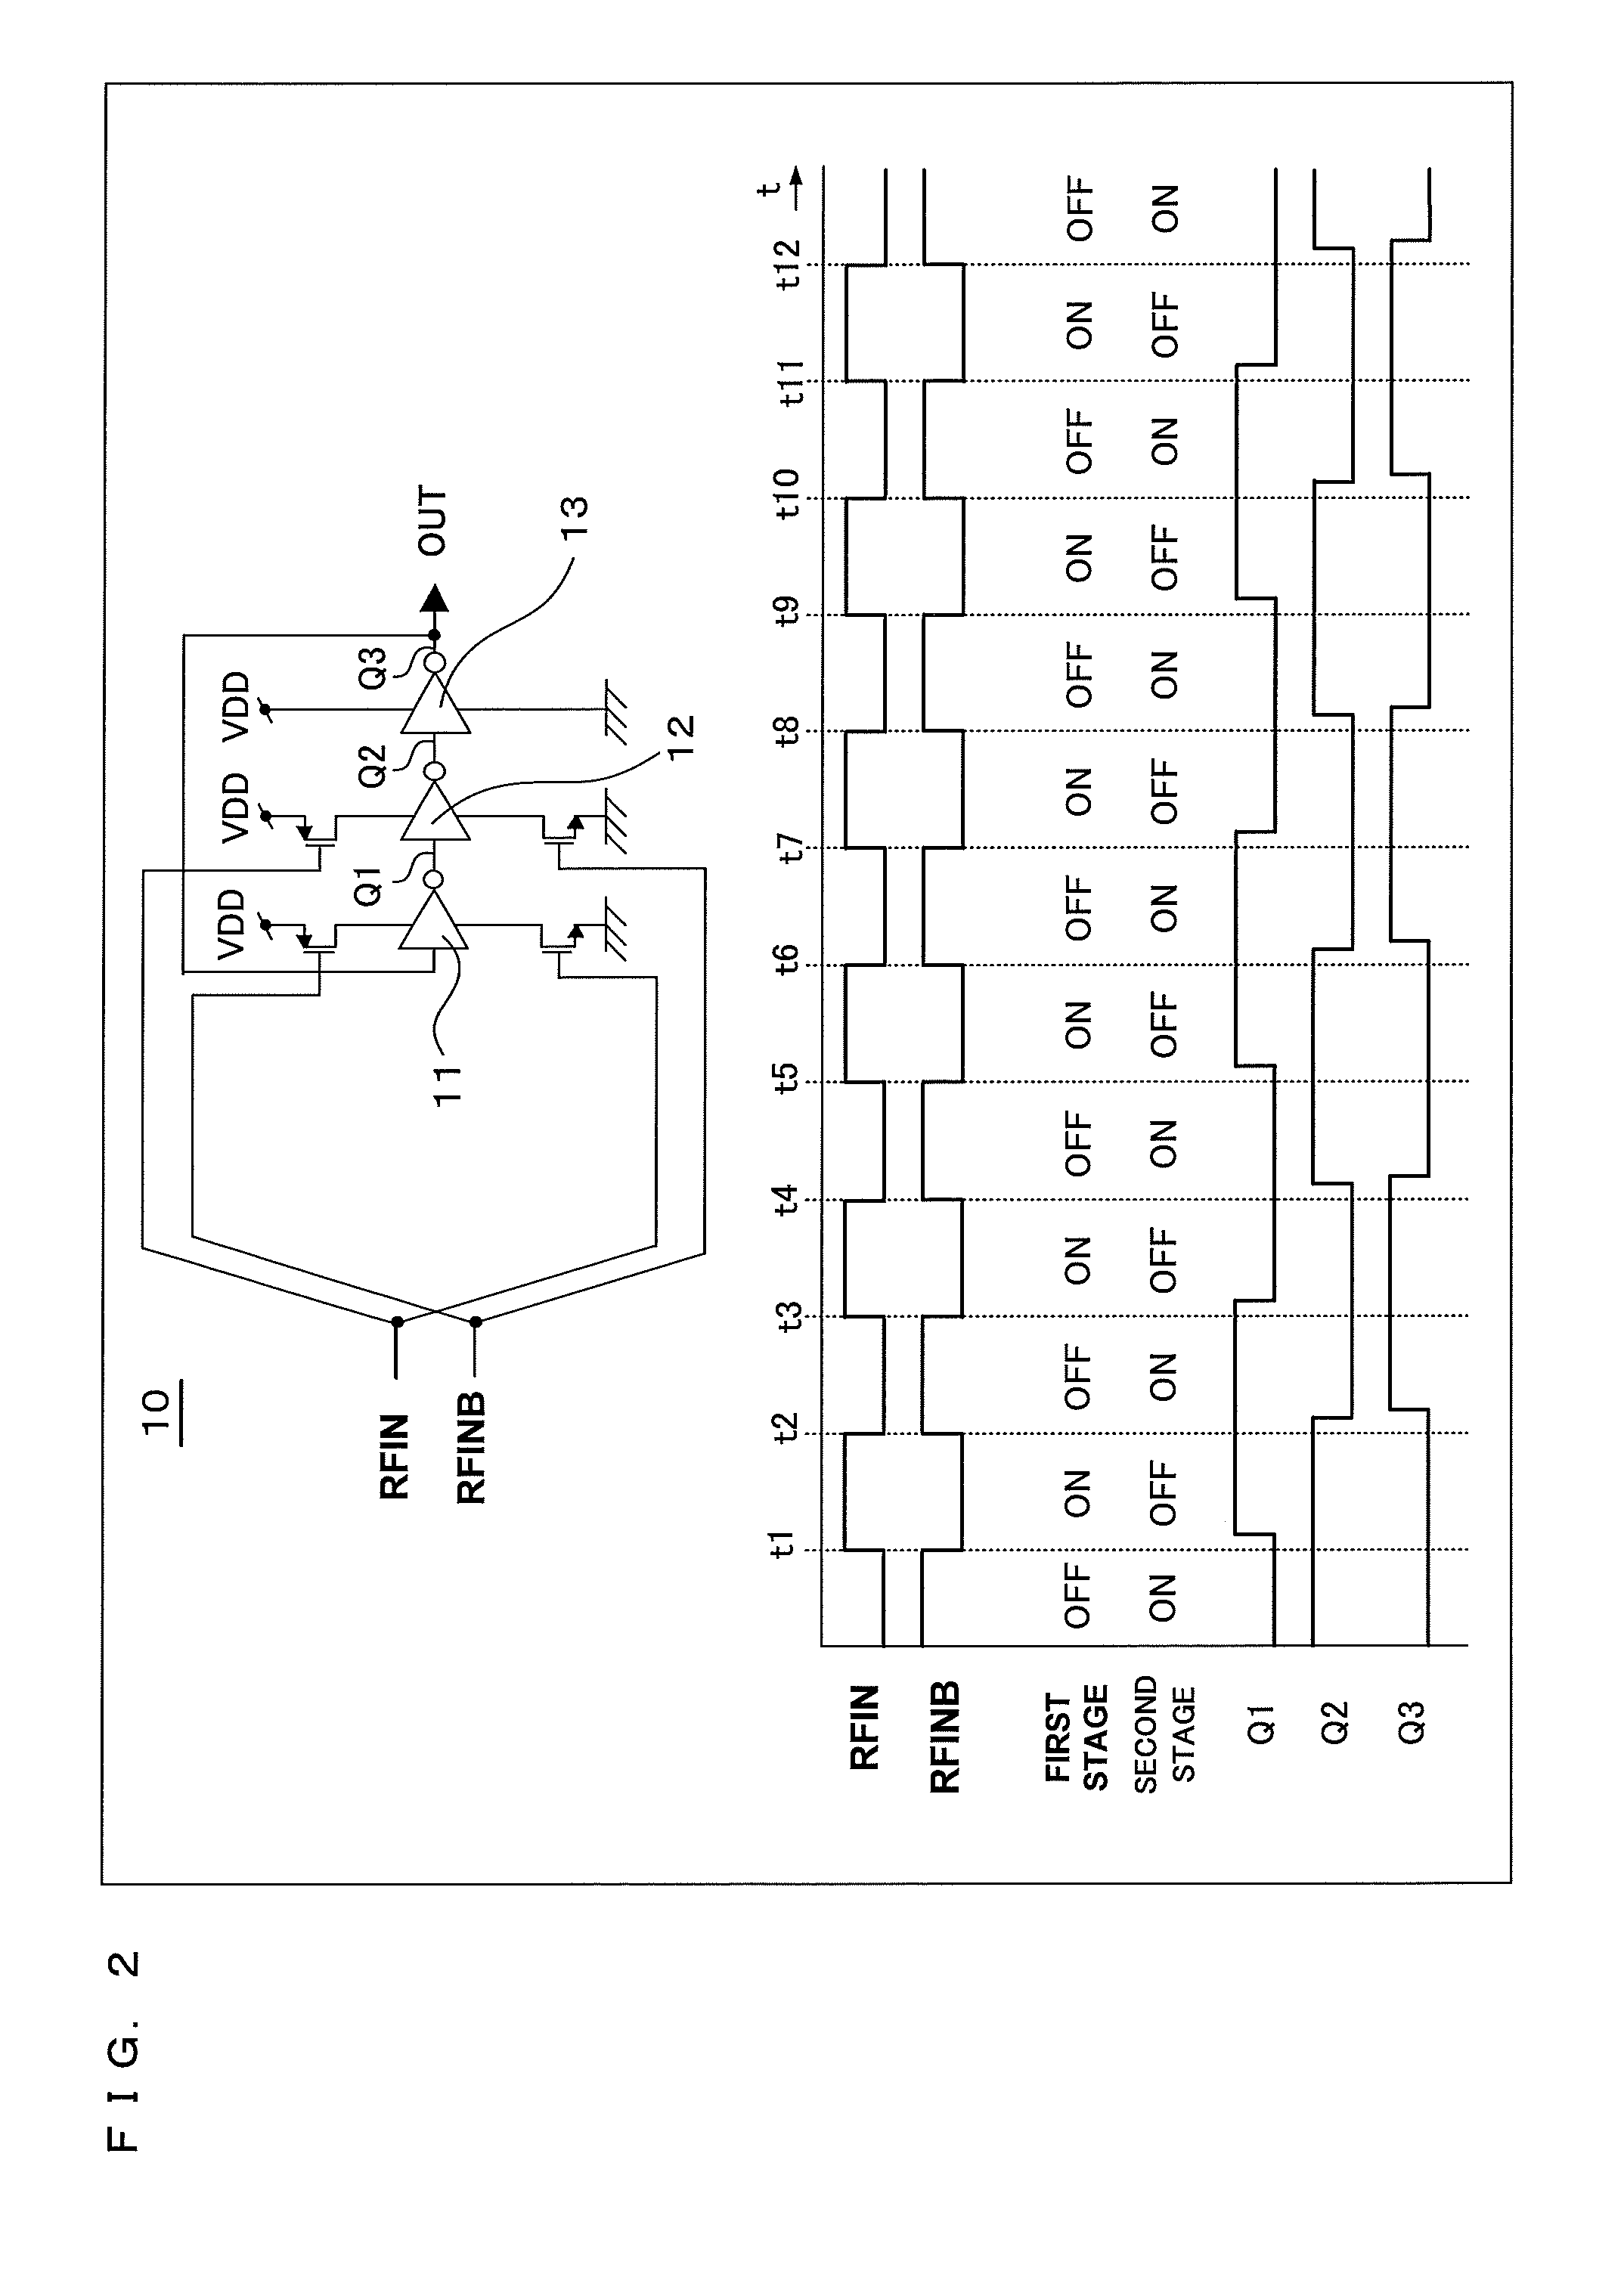 Cmos-inverter-type frequency divider circuit, and mobile phone including the cmos-inverter-type frequency divider circuit